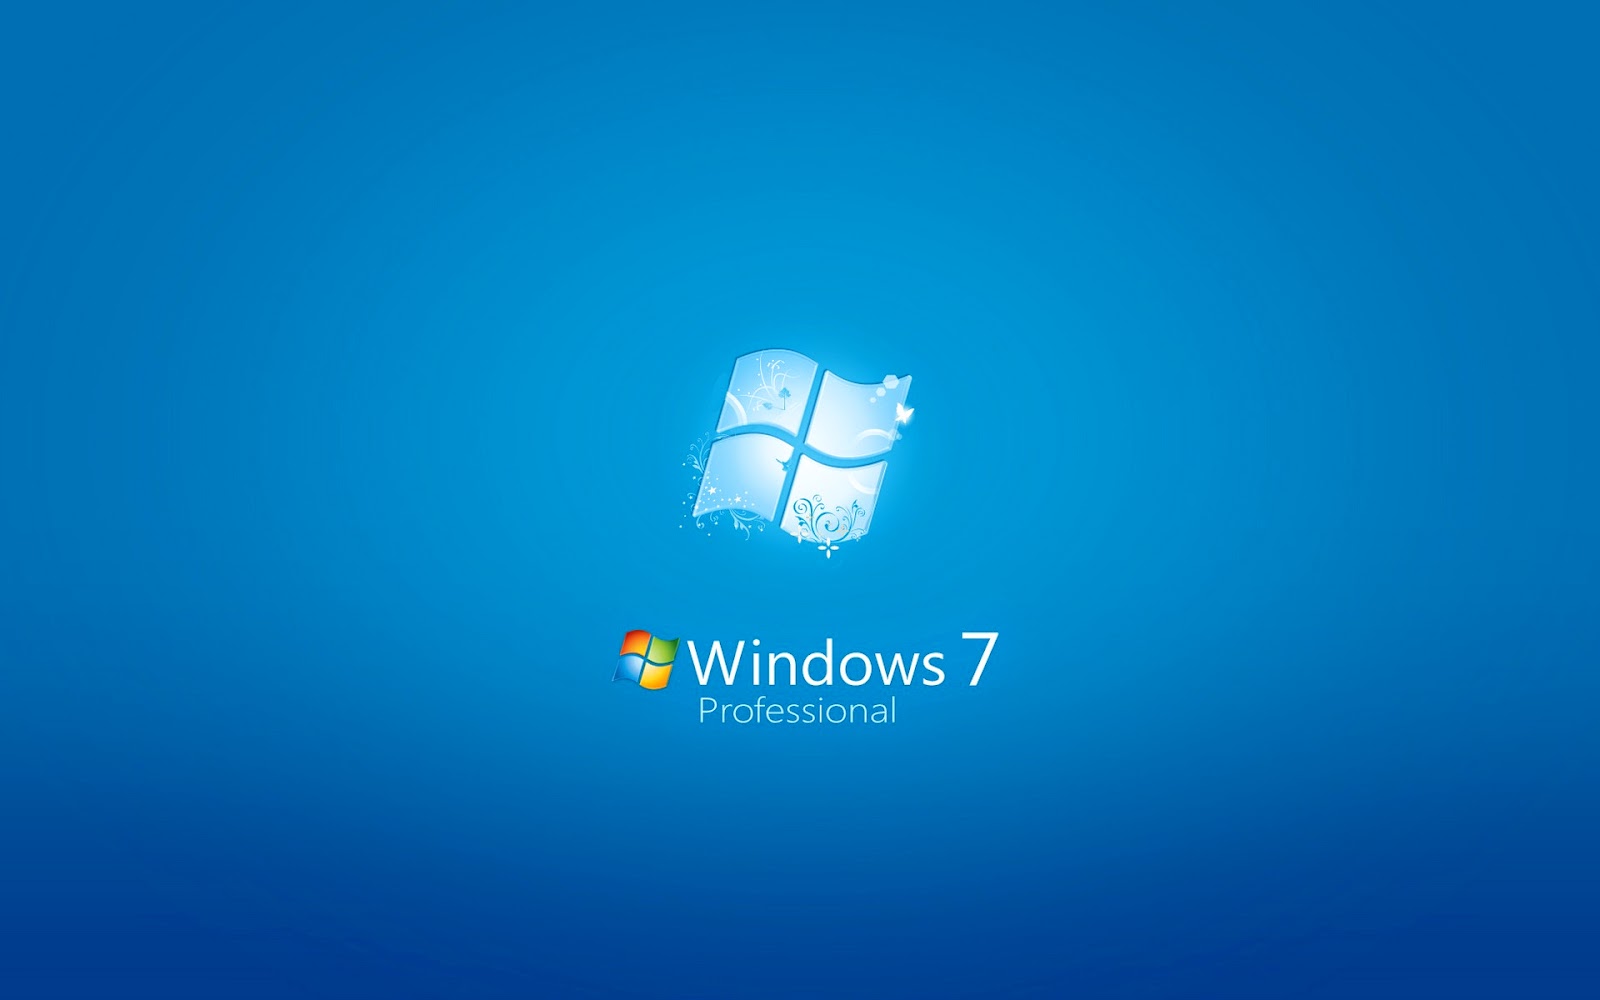 Information about Service Pack 1 for Windows 7 and for